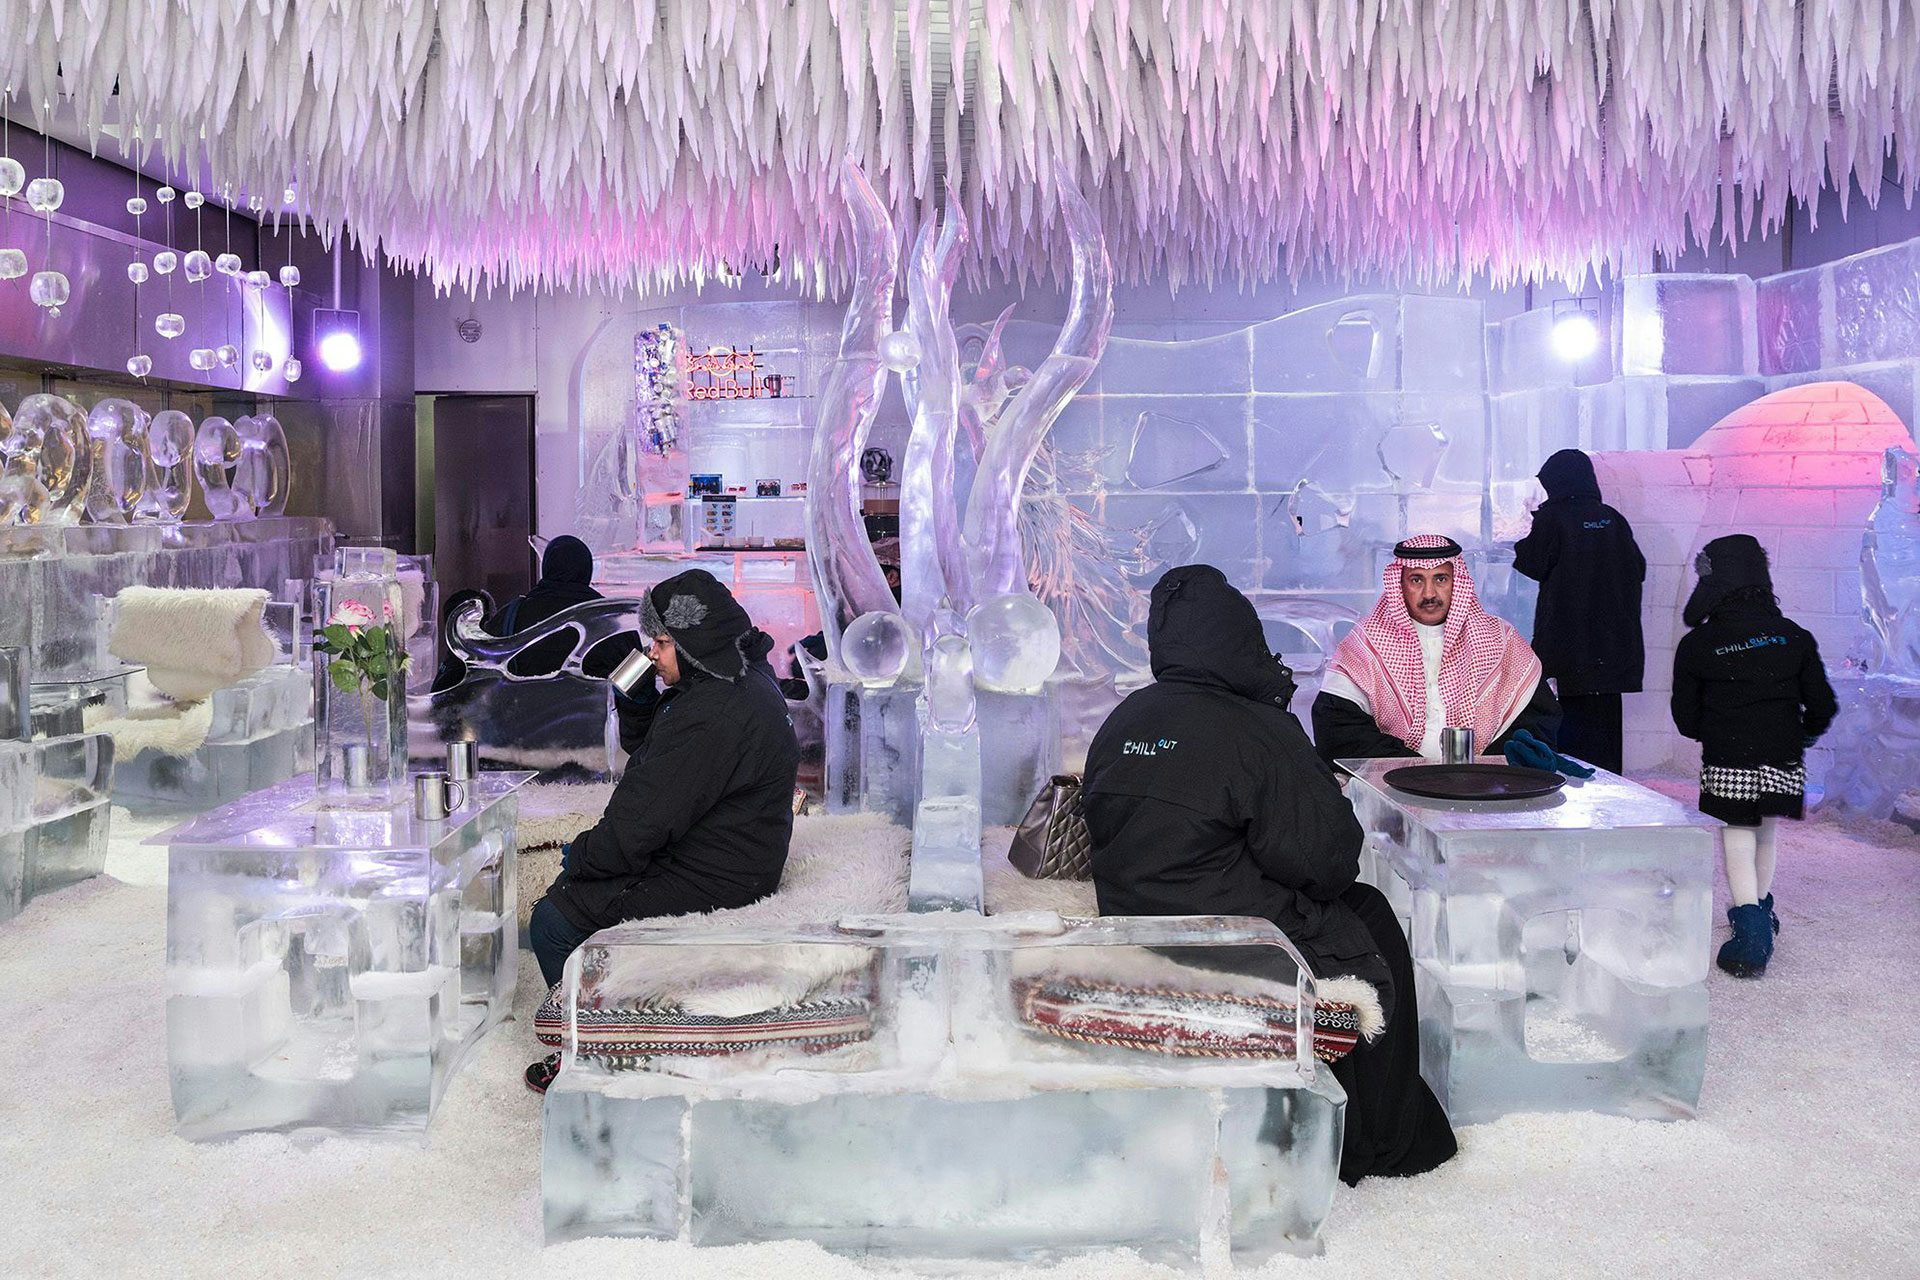 Chillout Ice Lounge, Dubai, January 2016. Saudi tourists having a hot chocolate at the Chillout Ice Lounge, the first ice lounge in the Middle East. Complete with ice sculptures, ice seating and tables, all at a subzero temperature. © Nick Hannes.